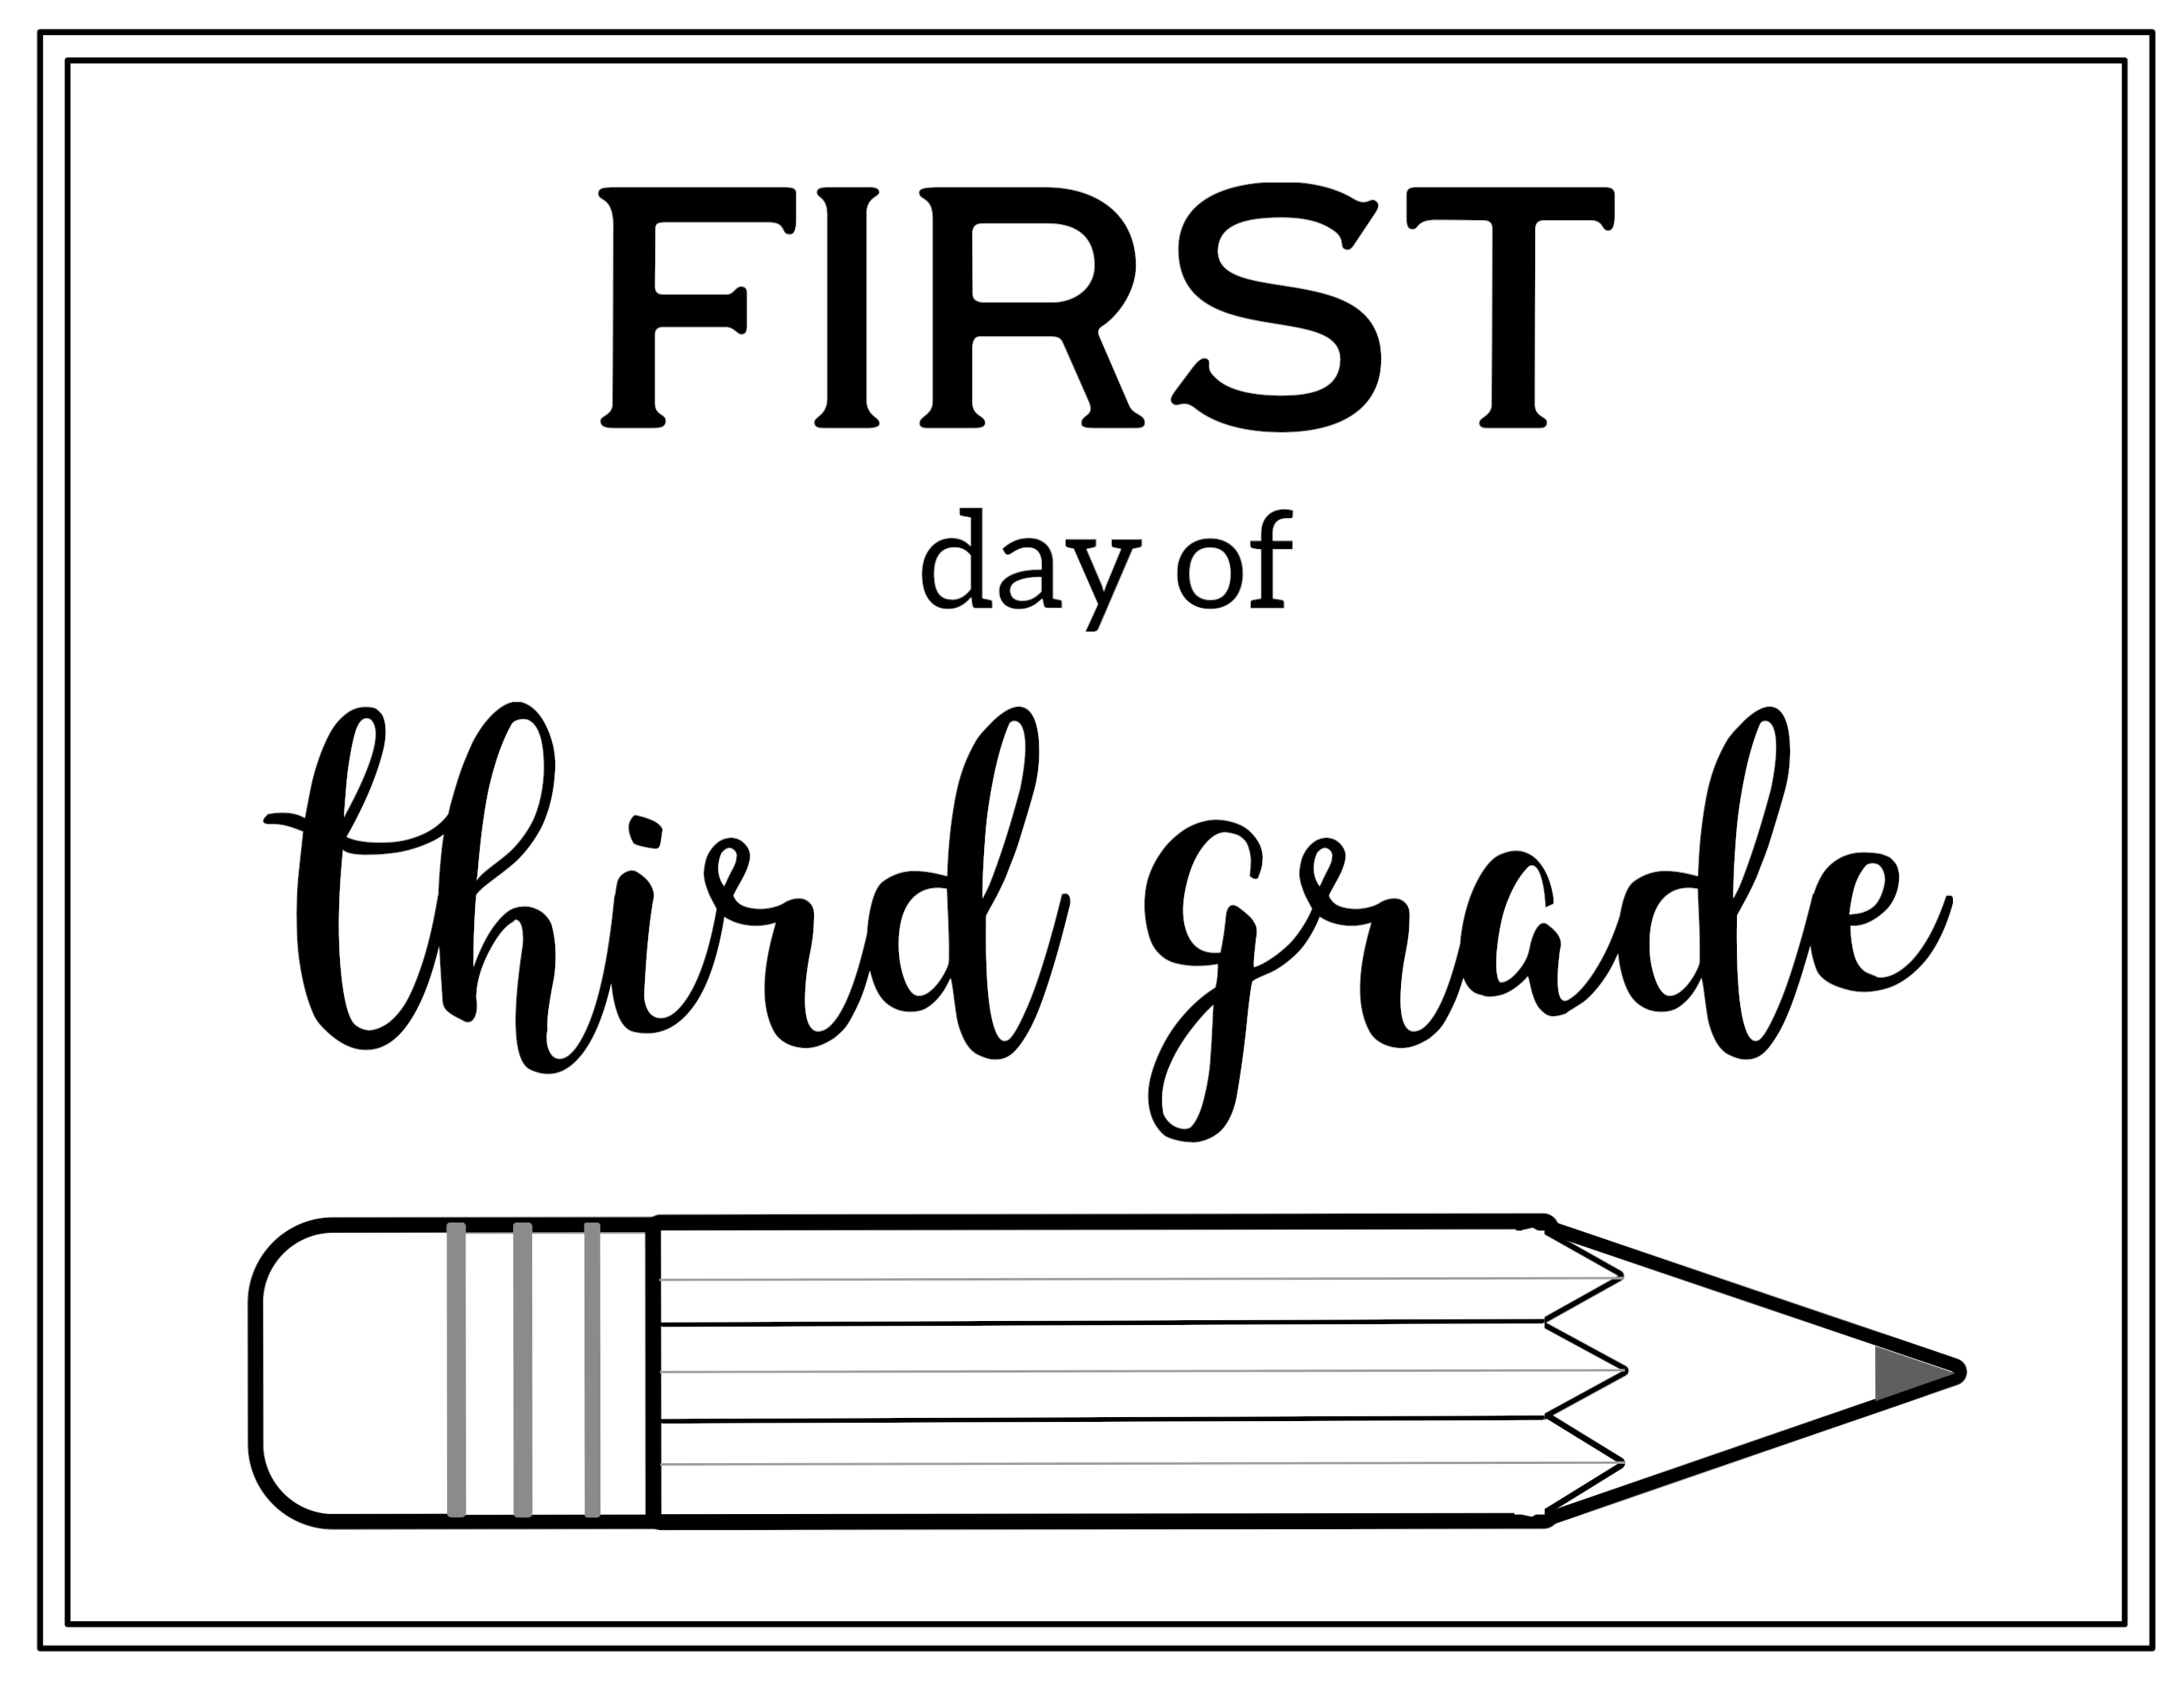 First Day Of Grade 6 Free Printable